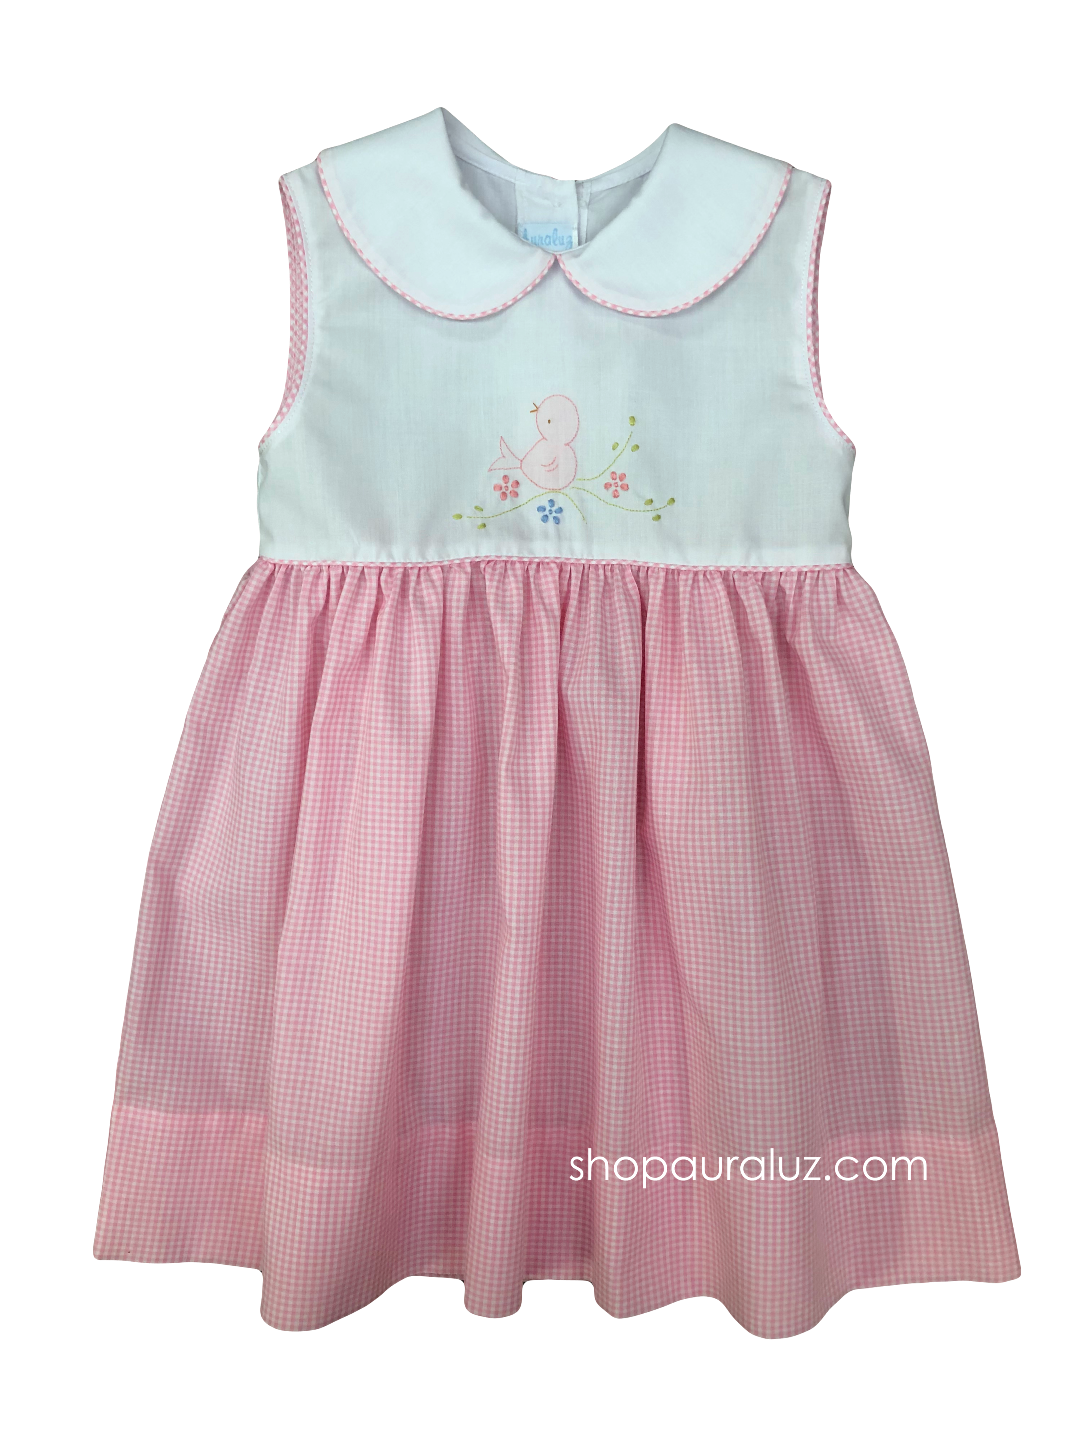 Auraluz Girl Sleeveless Dress...White/pink check with p.p. collar and embroidered bird